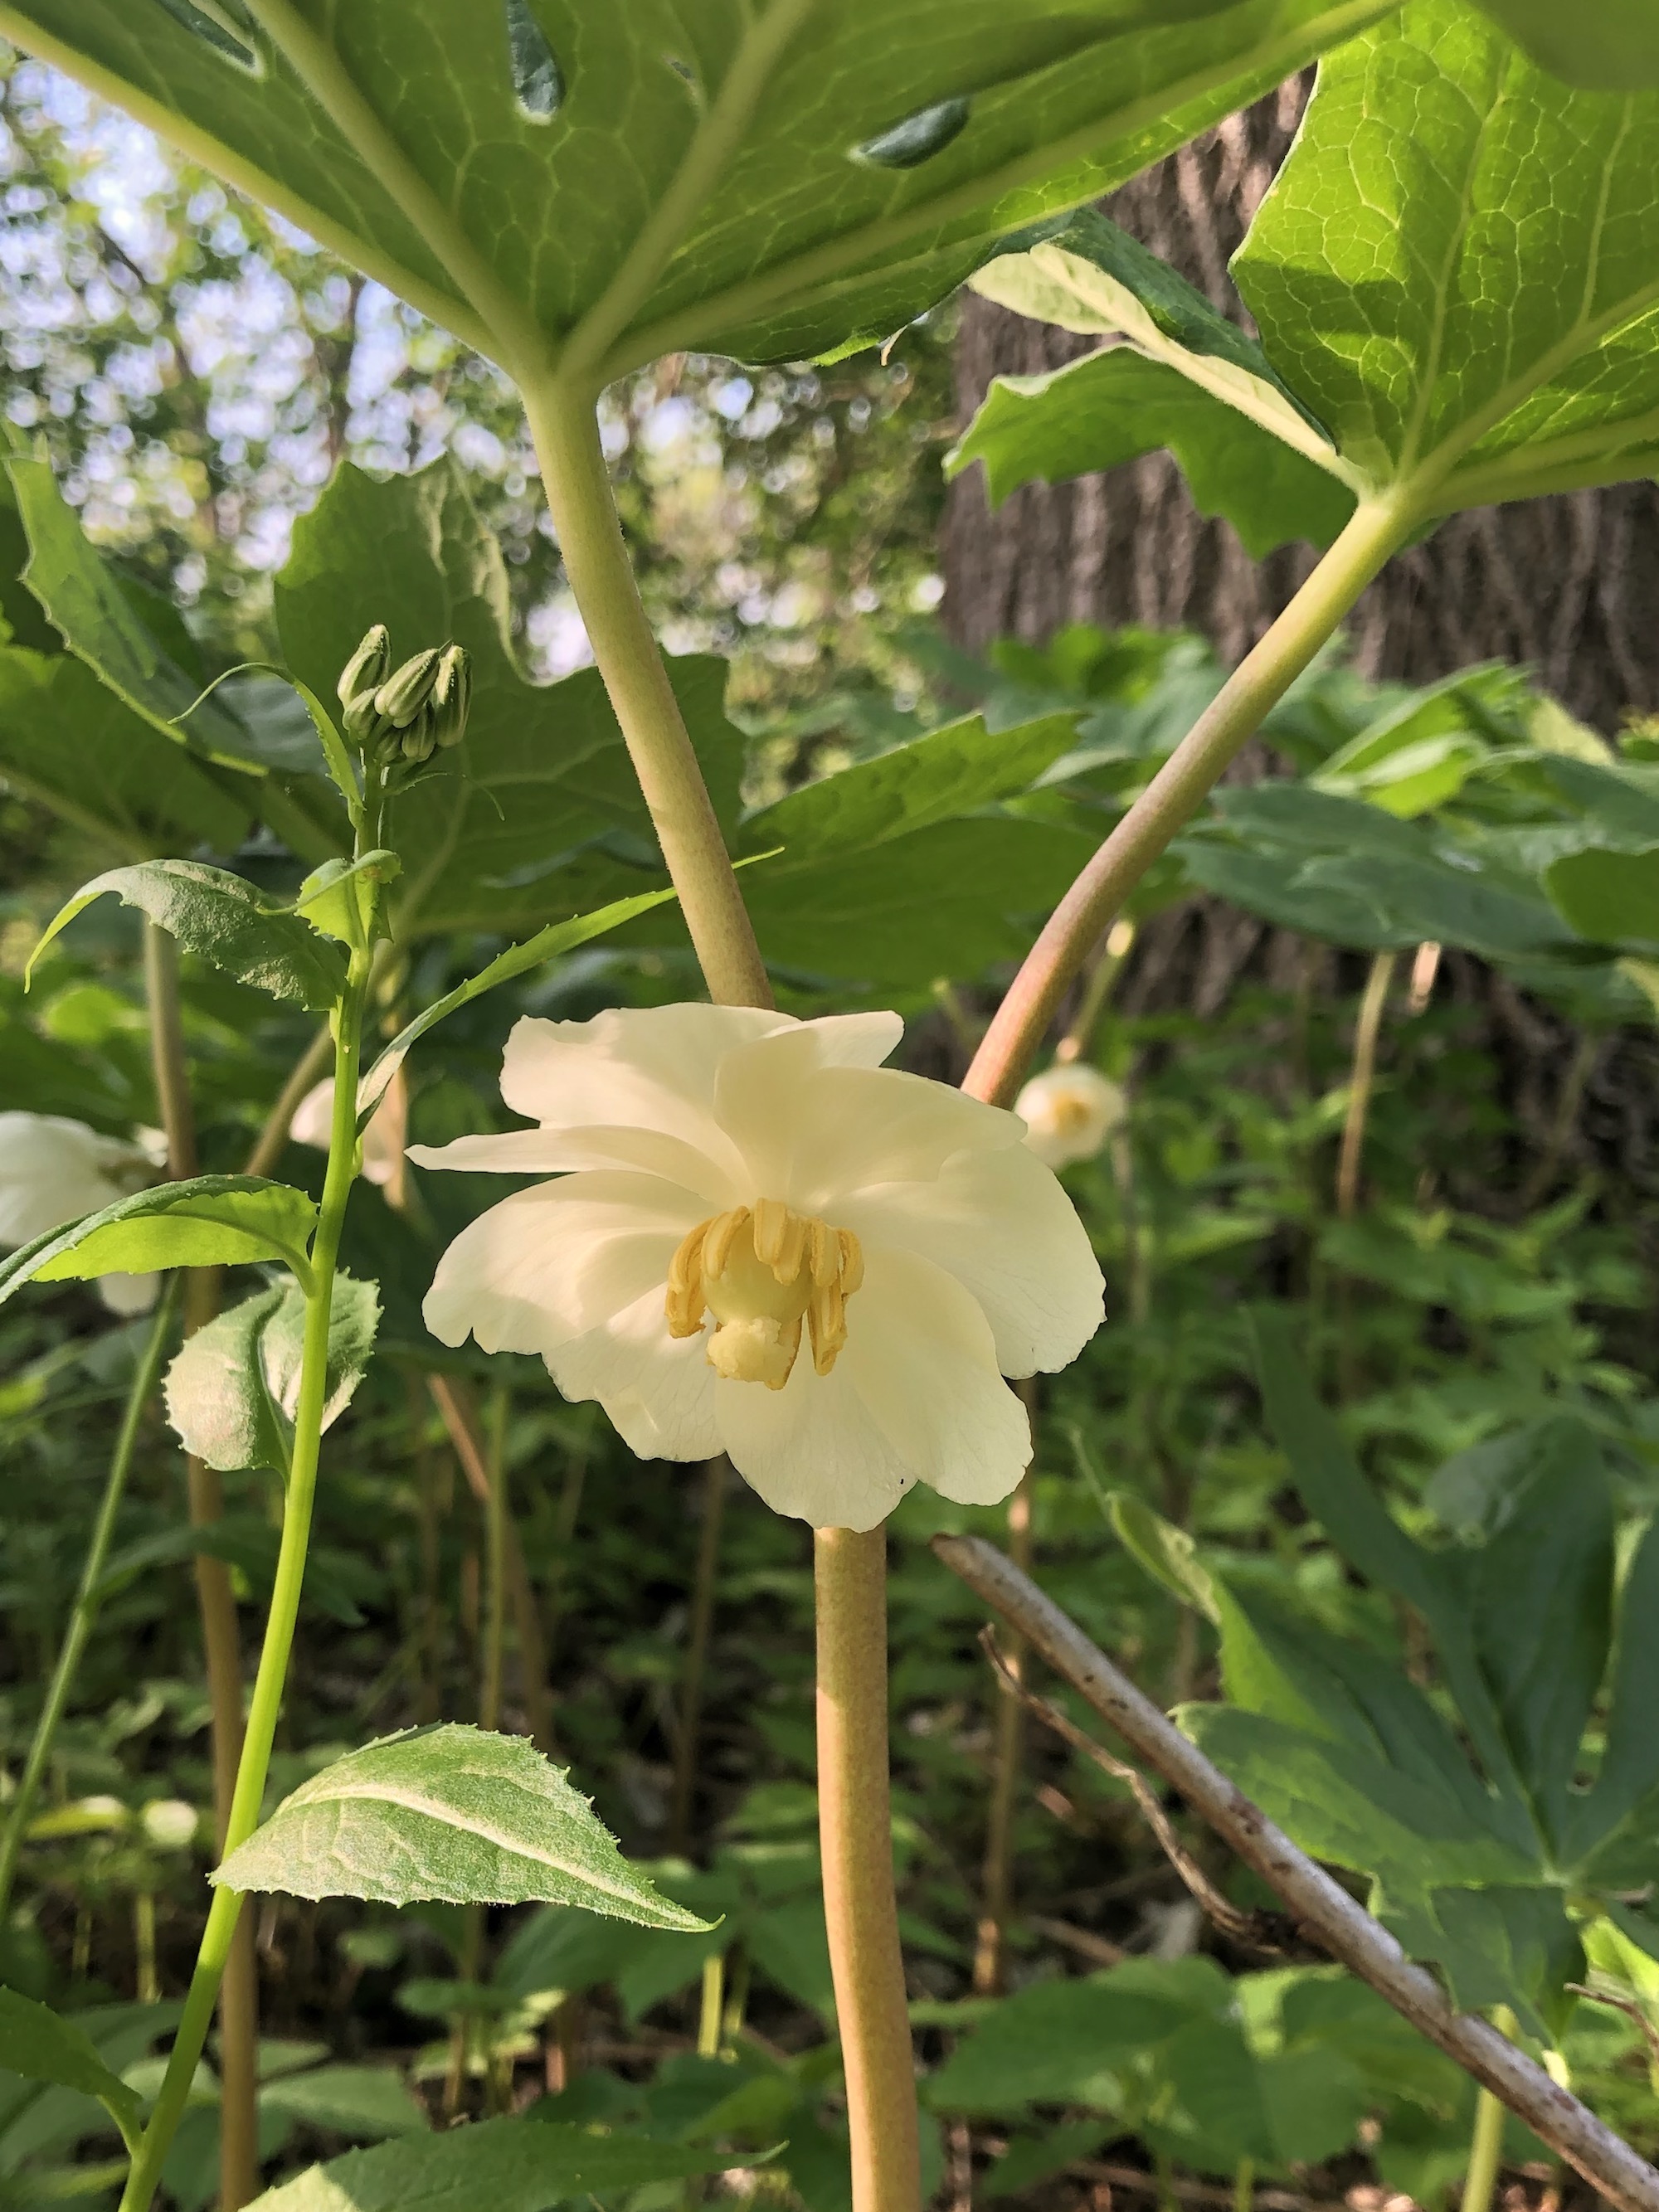 Mayapple blooms between Duck Pond and Marion Dunn Madison, Wisconsin on May 17, 2021.